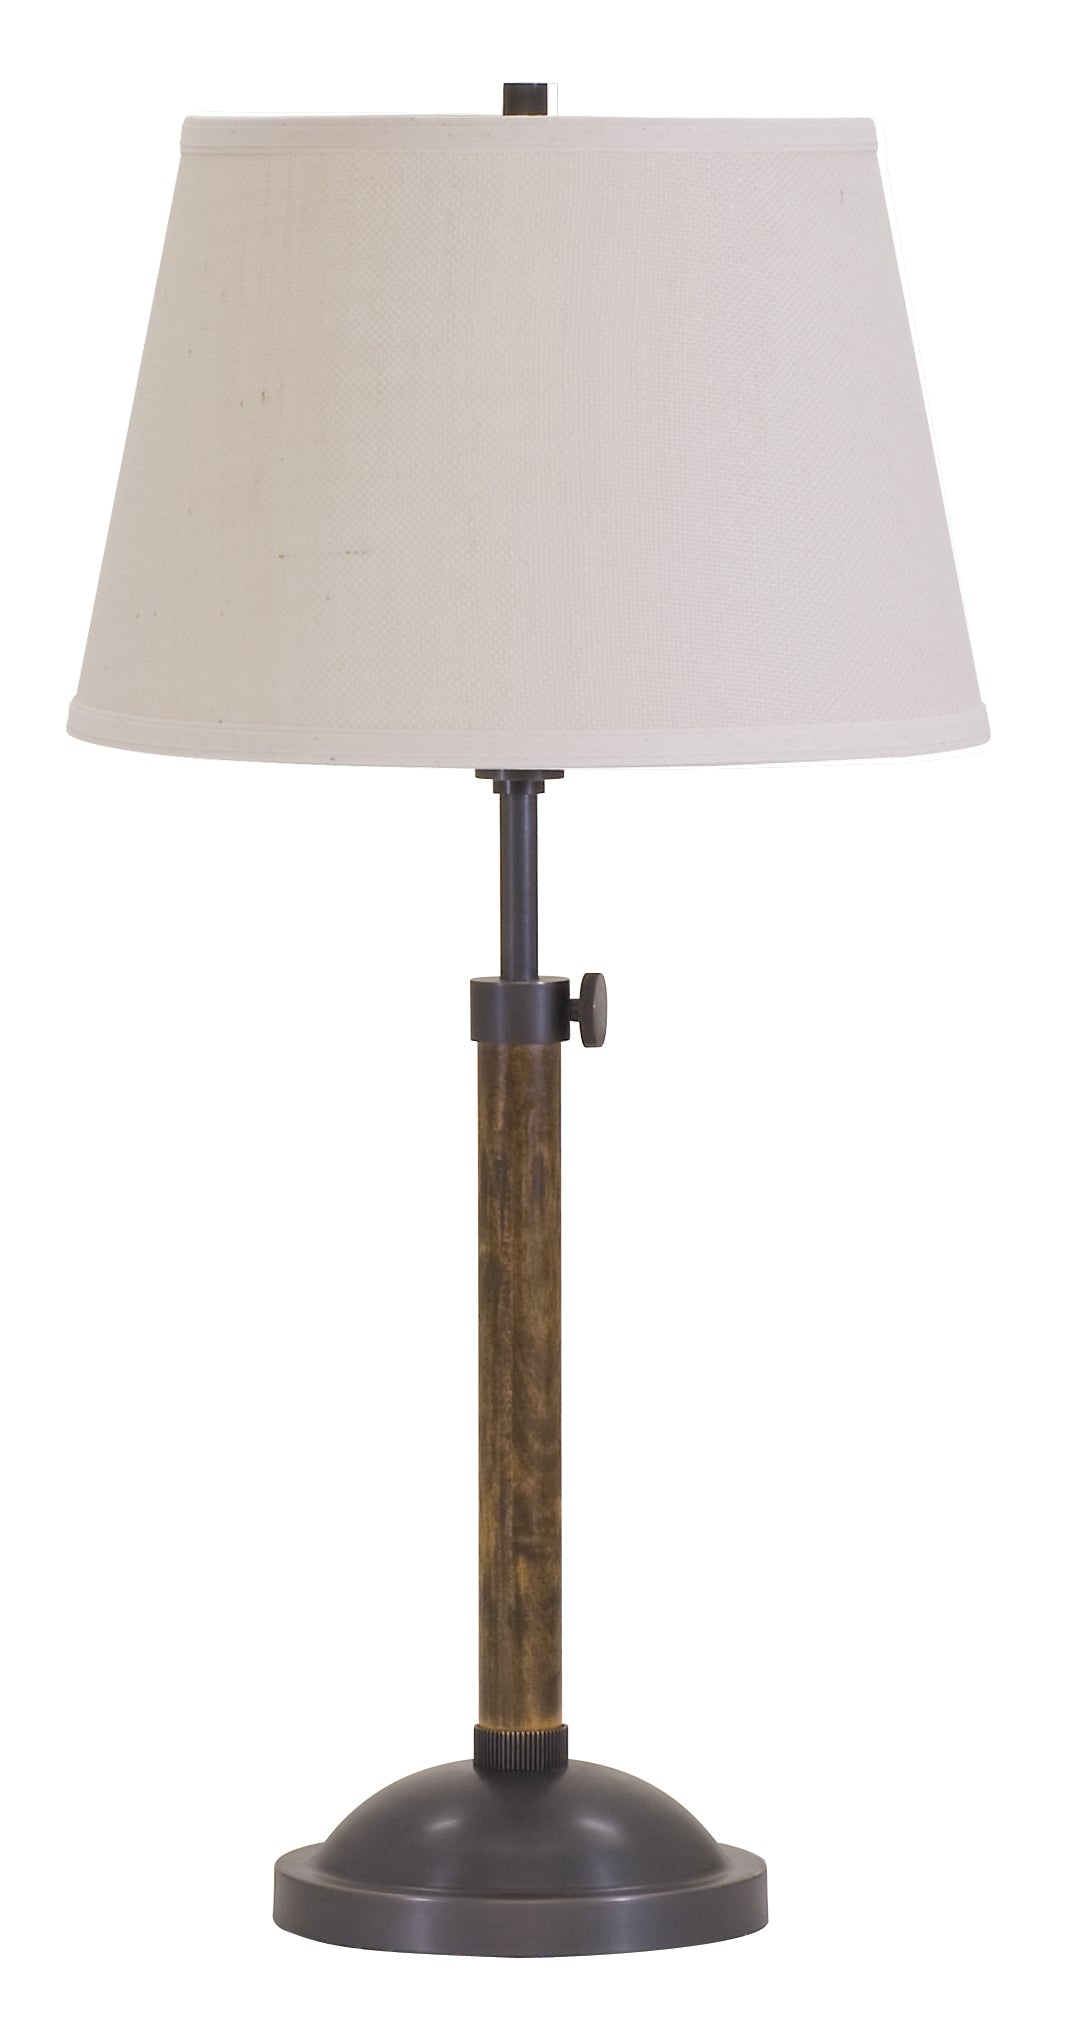 House of Troy Richmond Adjustable Oil Rubbed Bronze Table Lamp R450-OB